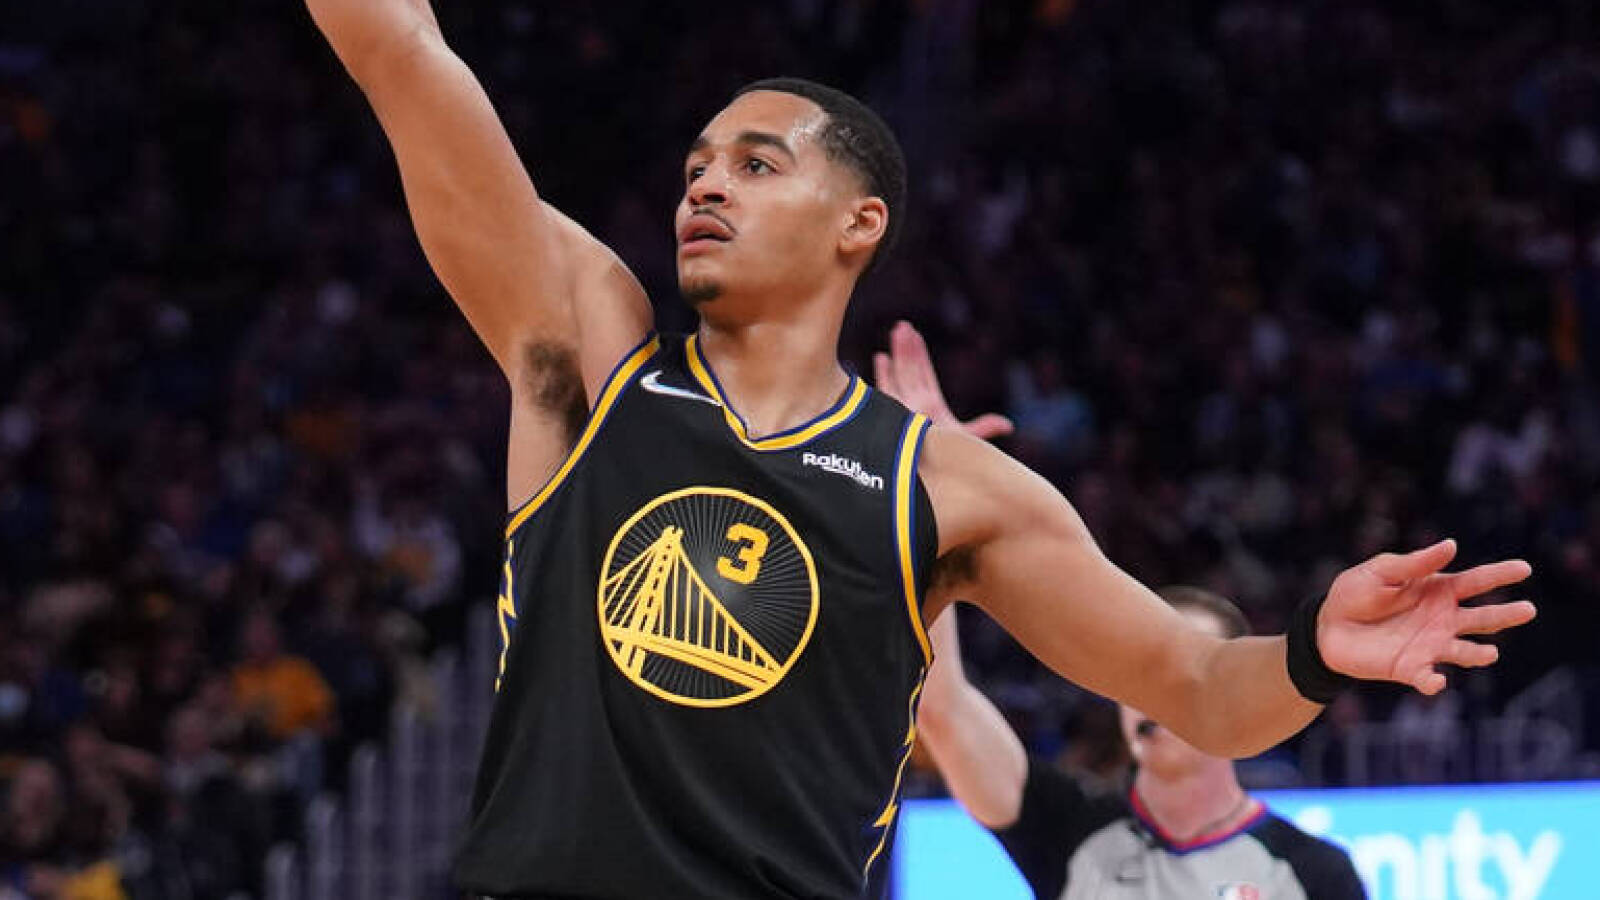 Jordan Poole scores 30 in playoff debut to lead Warriors past Nuggets in Game 1